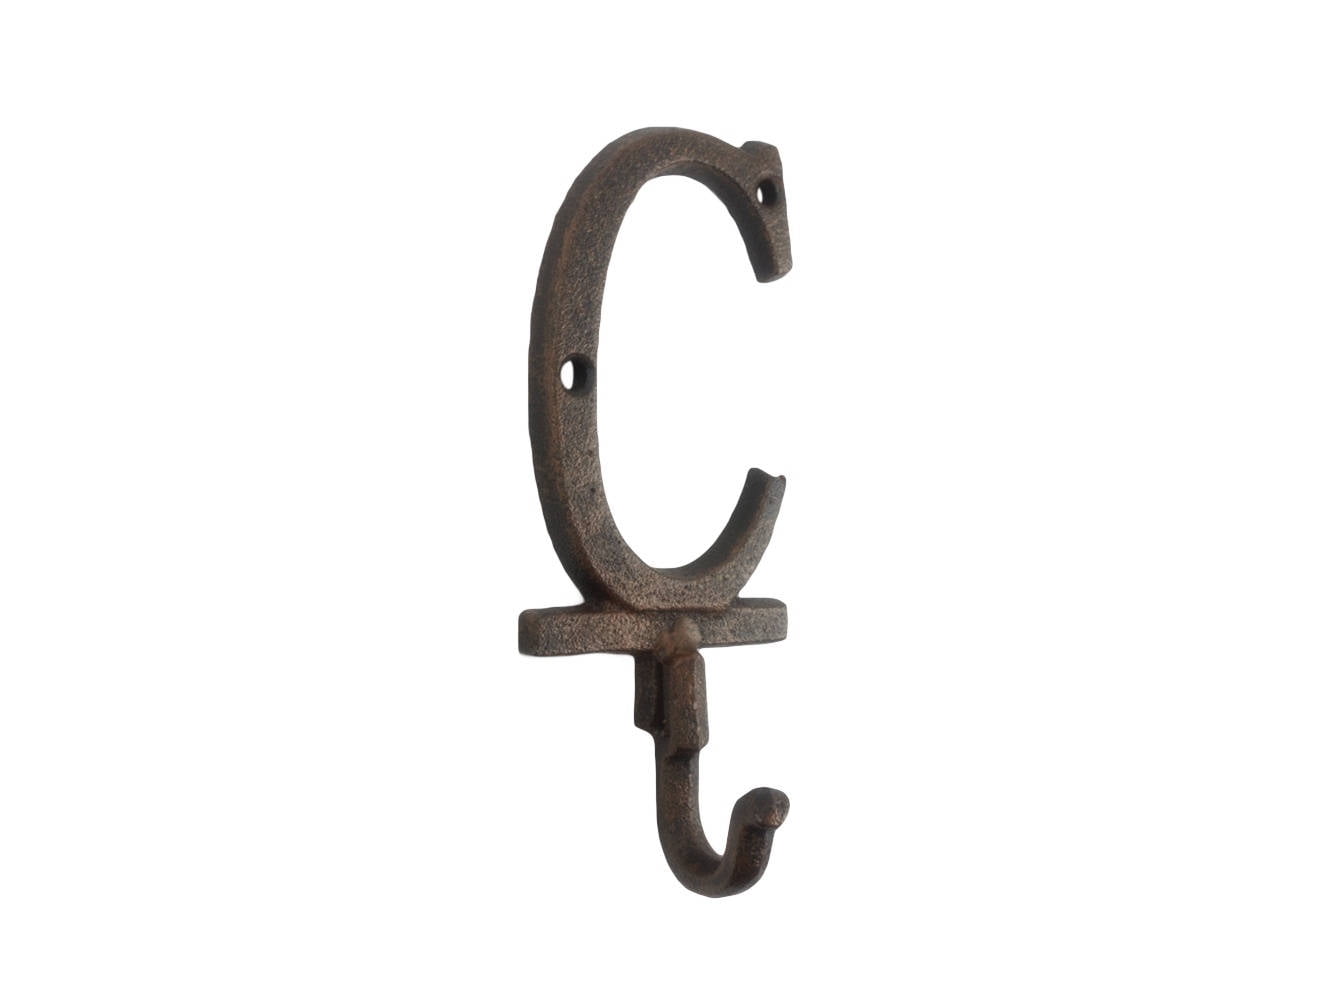 Handcrafted Model Ships 6 x 1 x 3 in. Rustic Copper Cast Iron Letter C  Alphabet Wall Hooks 